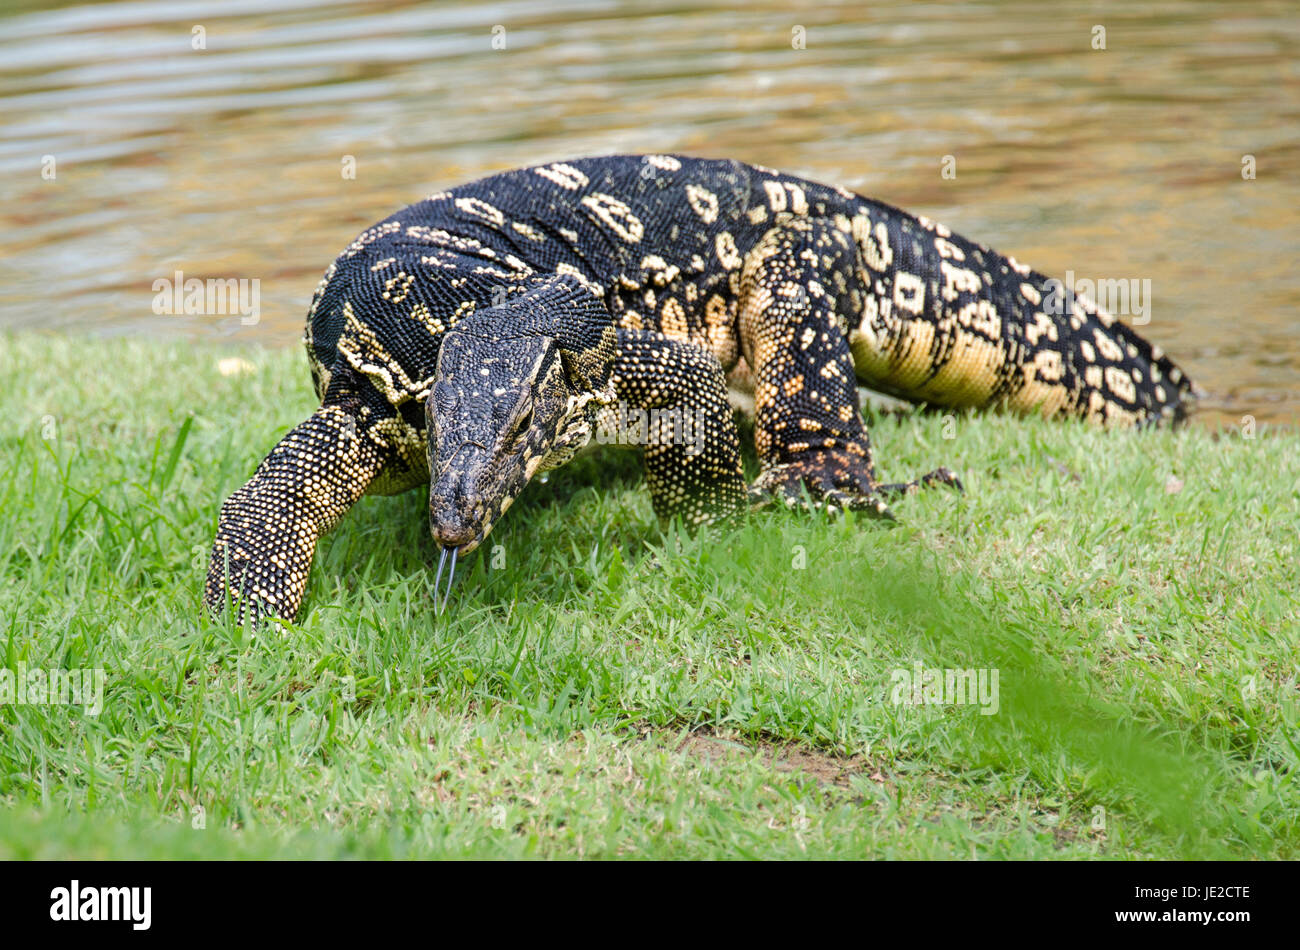 Asian water monitor (Varanus salvator) commonly found roaming free in public park Stock Photo